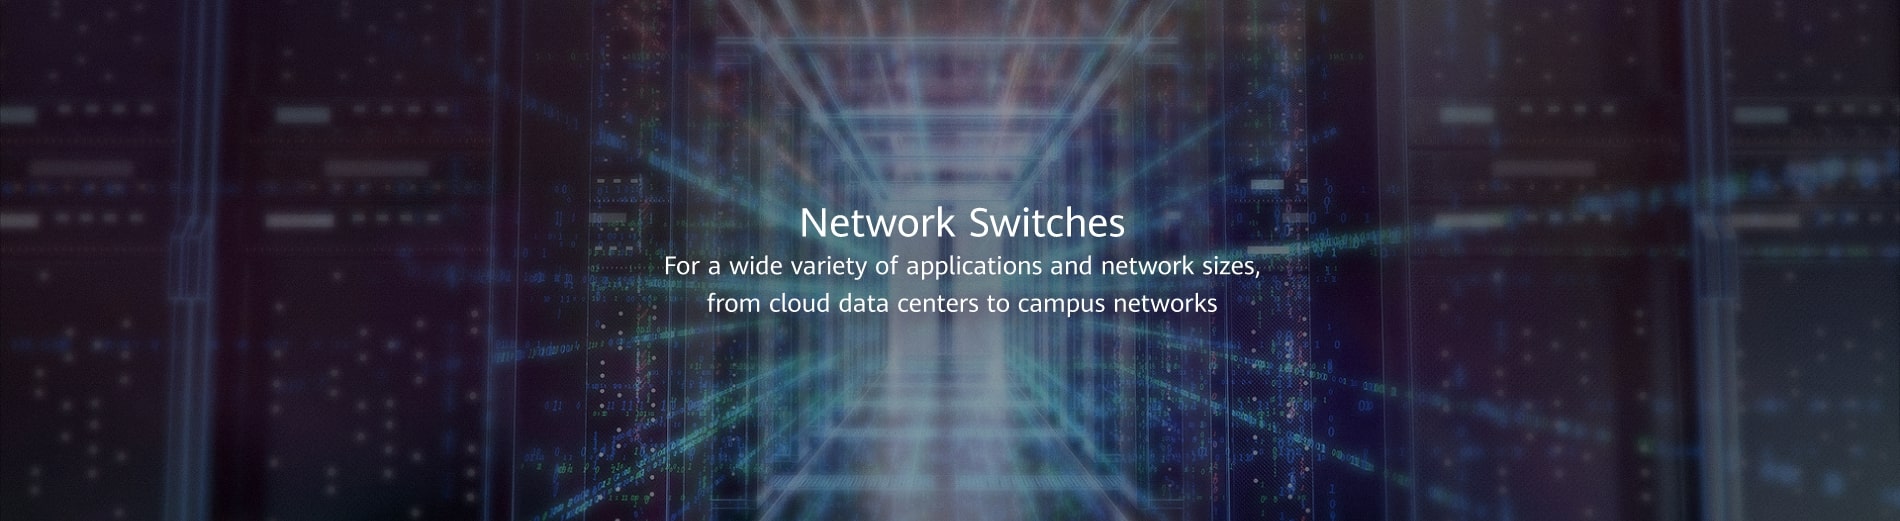 Huawei Network Switches Header